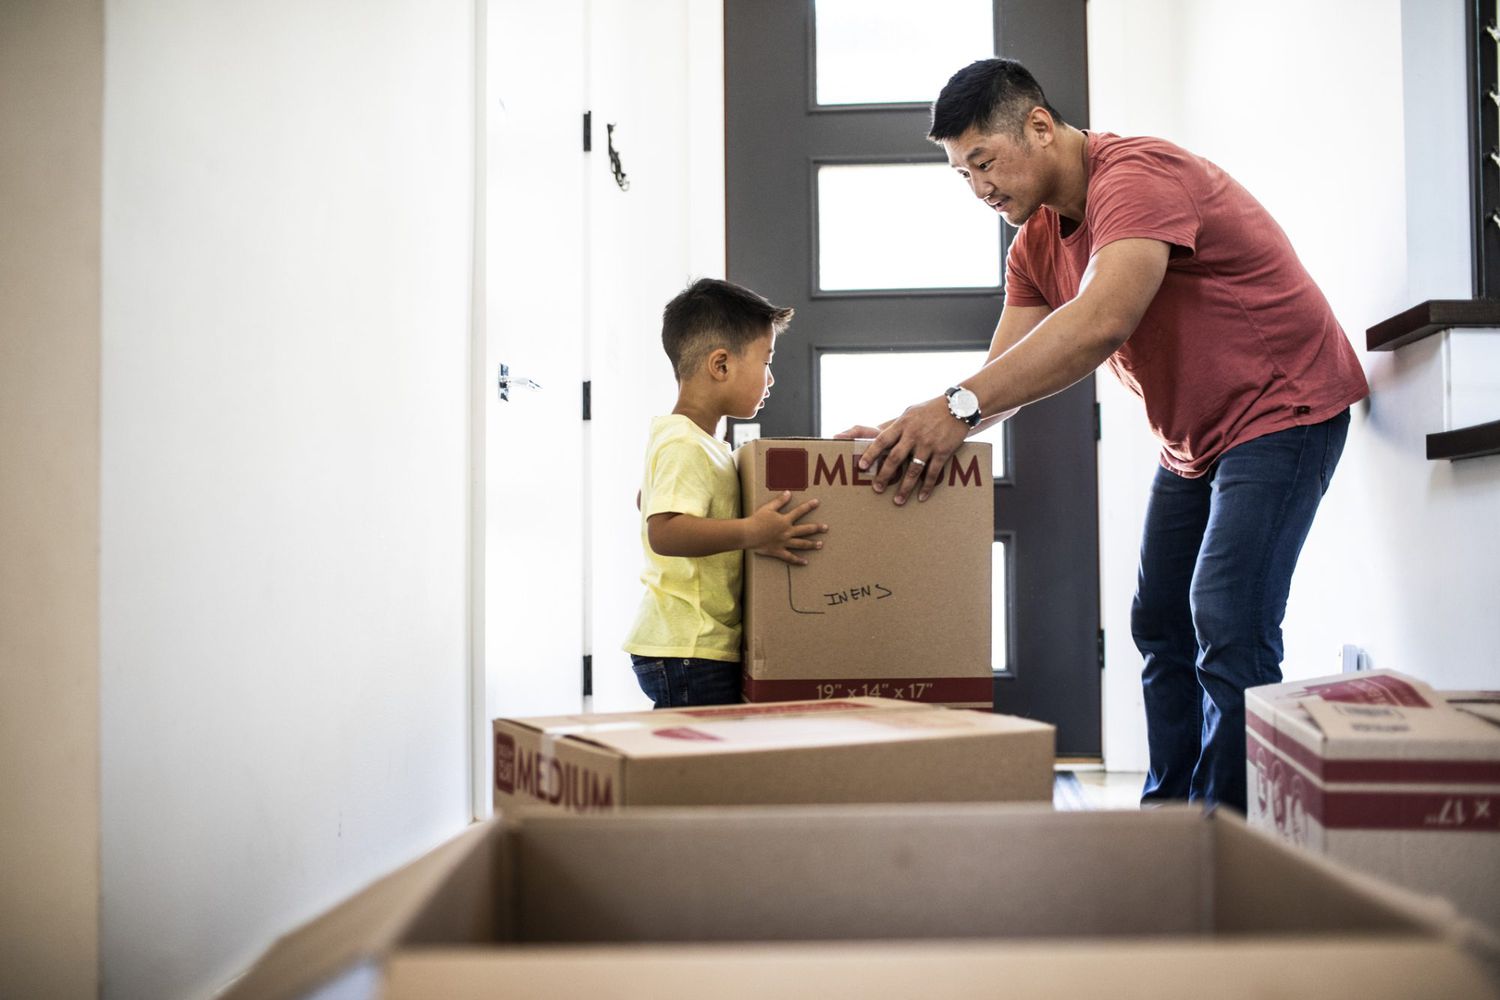 An image of a boy and his dad moving boxes.